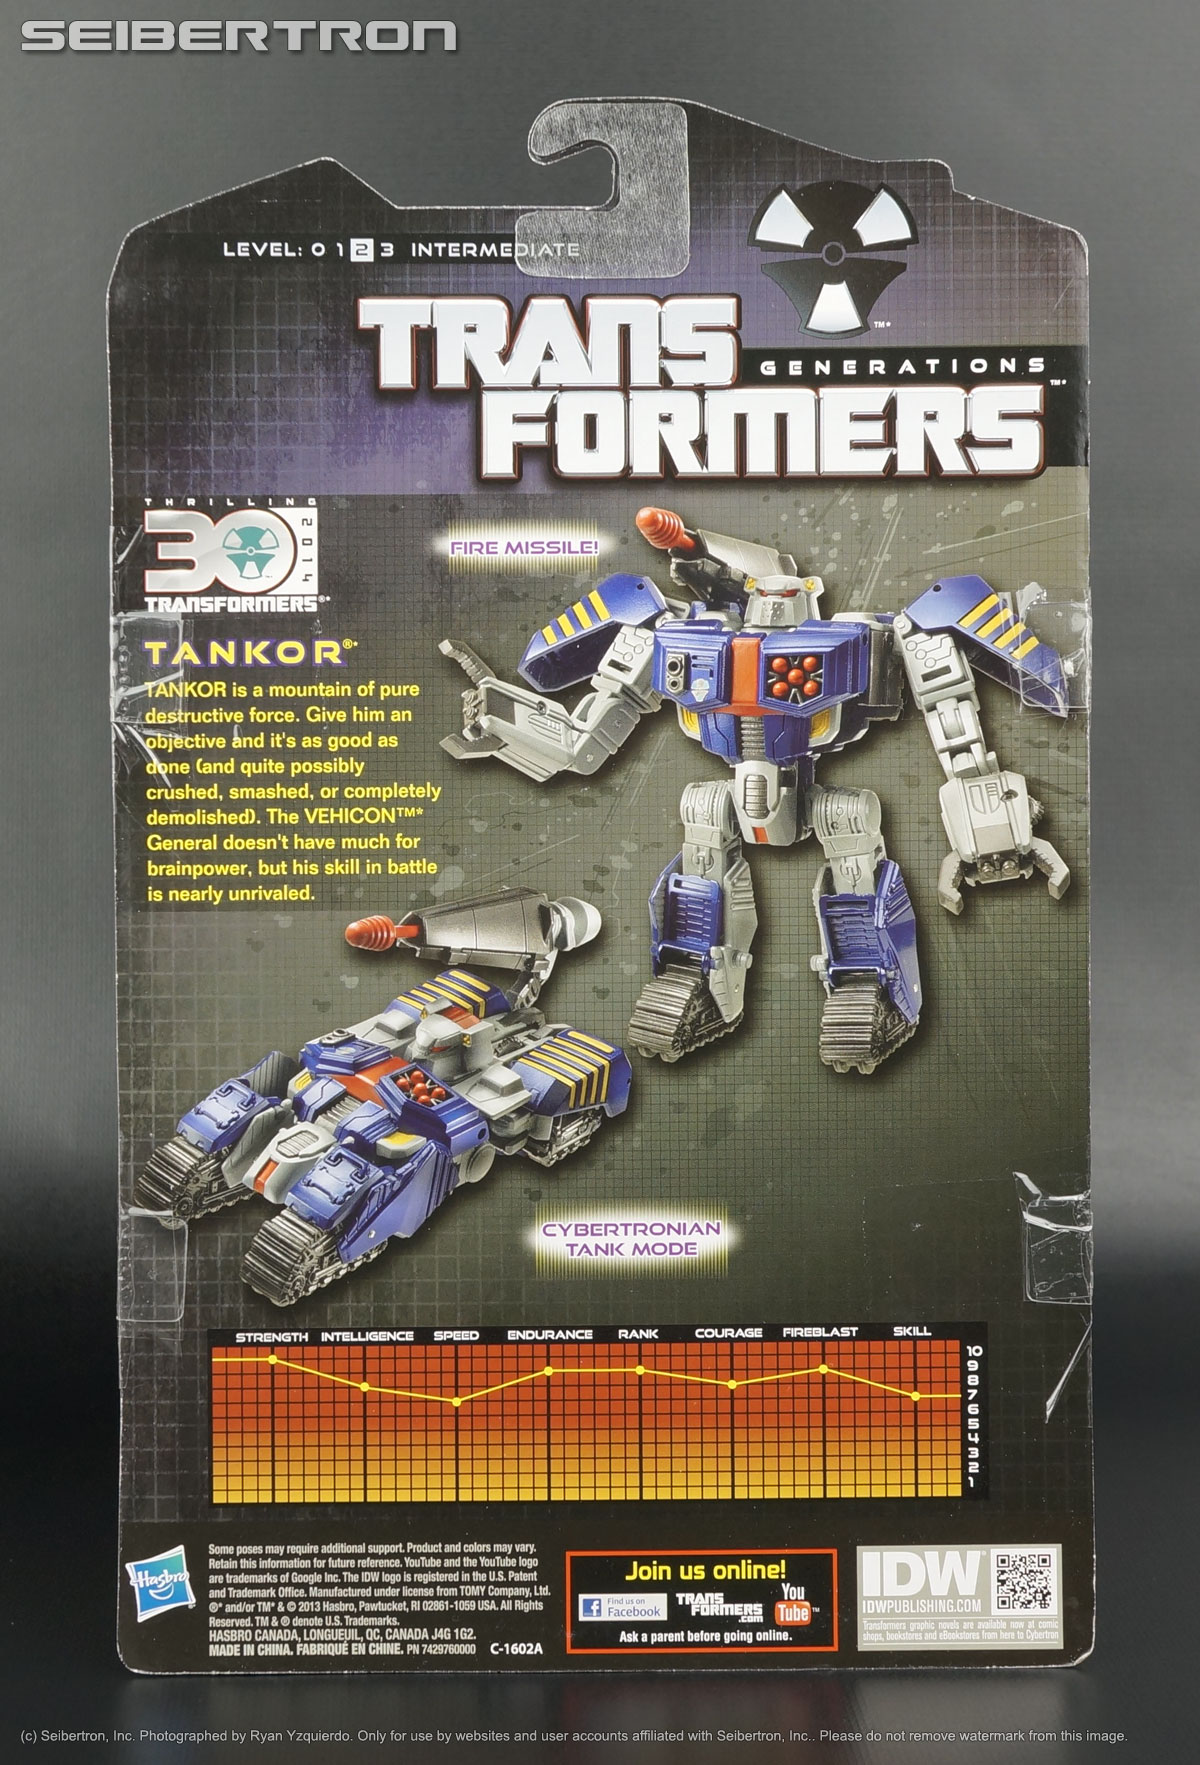 Transformers, Teenage Mutant Ninja Turtles, Masters of the Universe, Comic Books and more! listings from Seibertron.com: TANKOR Transformers Generations IDW Comic Deluxe 2014 Beast Machines Vehicon New